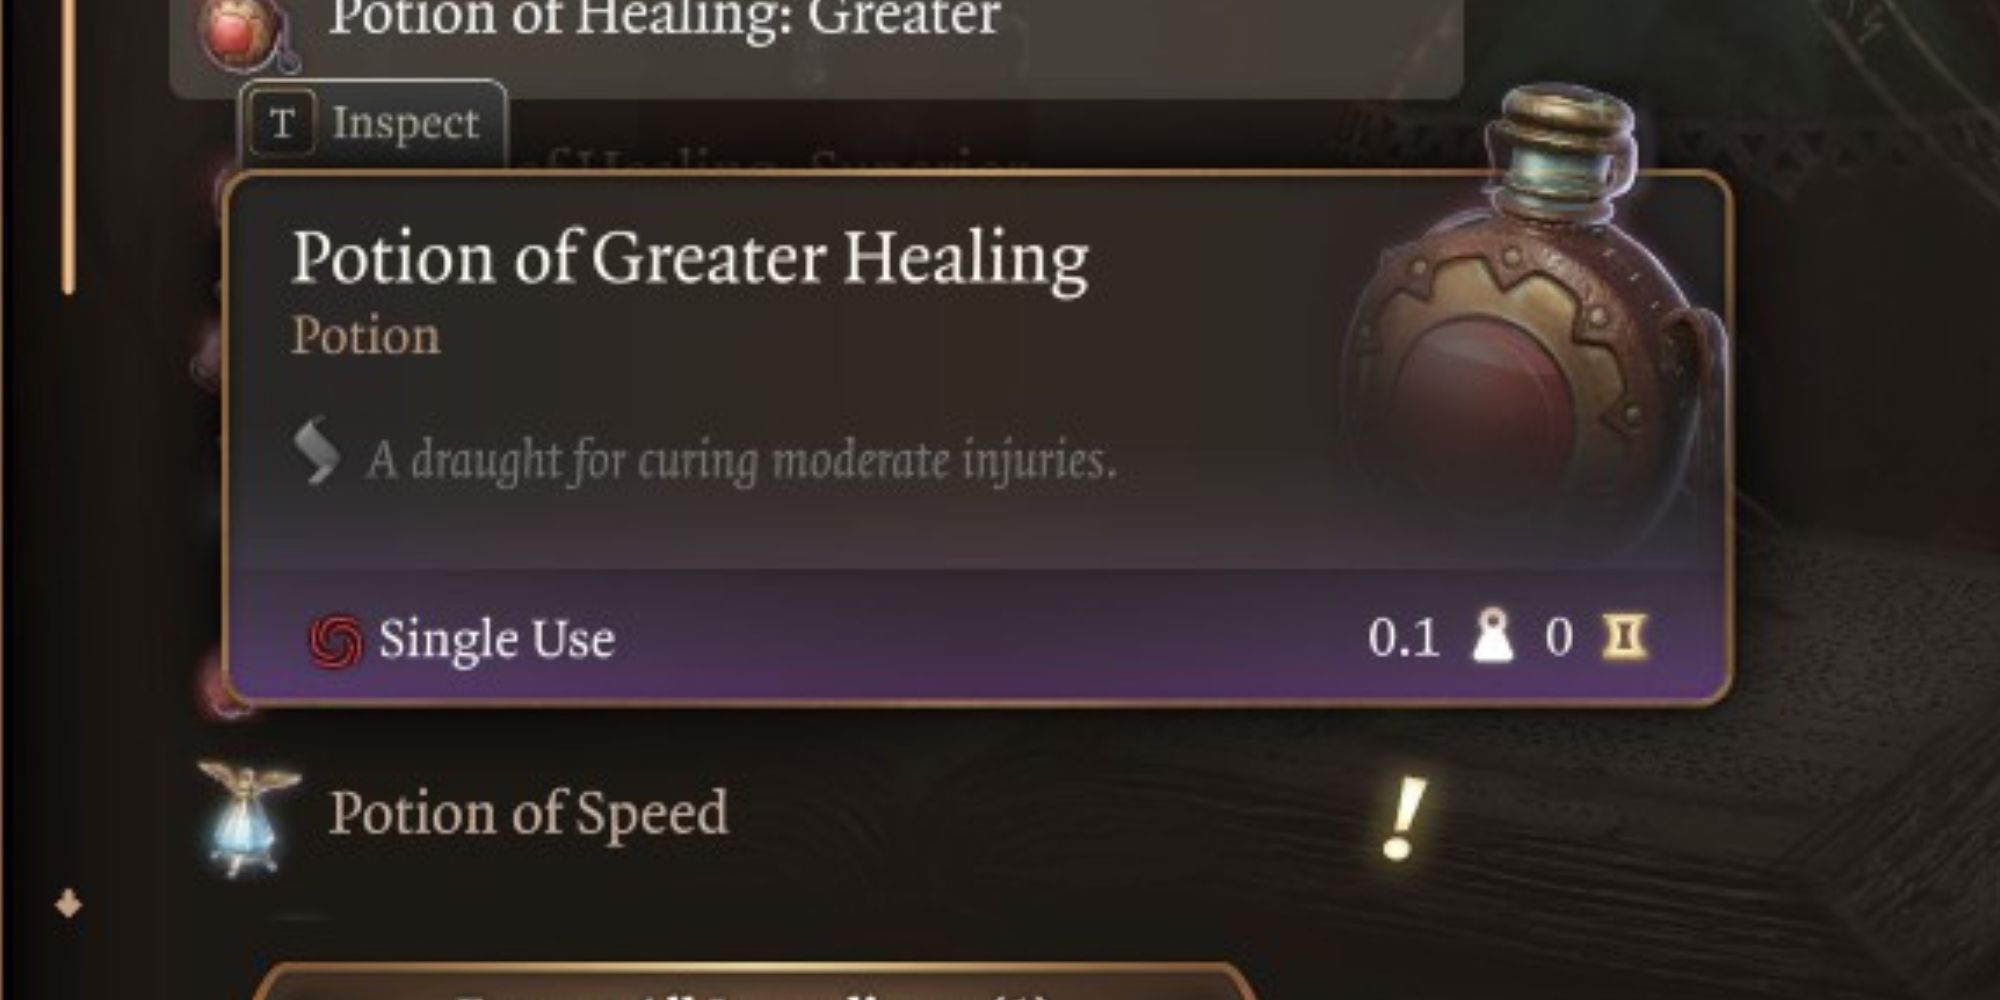 A Potion of Greater Healing in Baldur's Gate 3